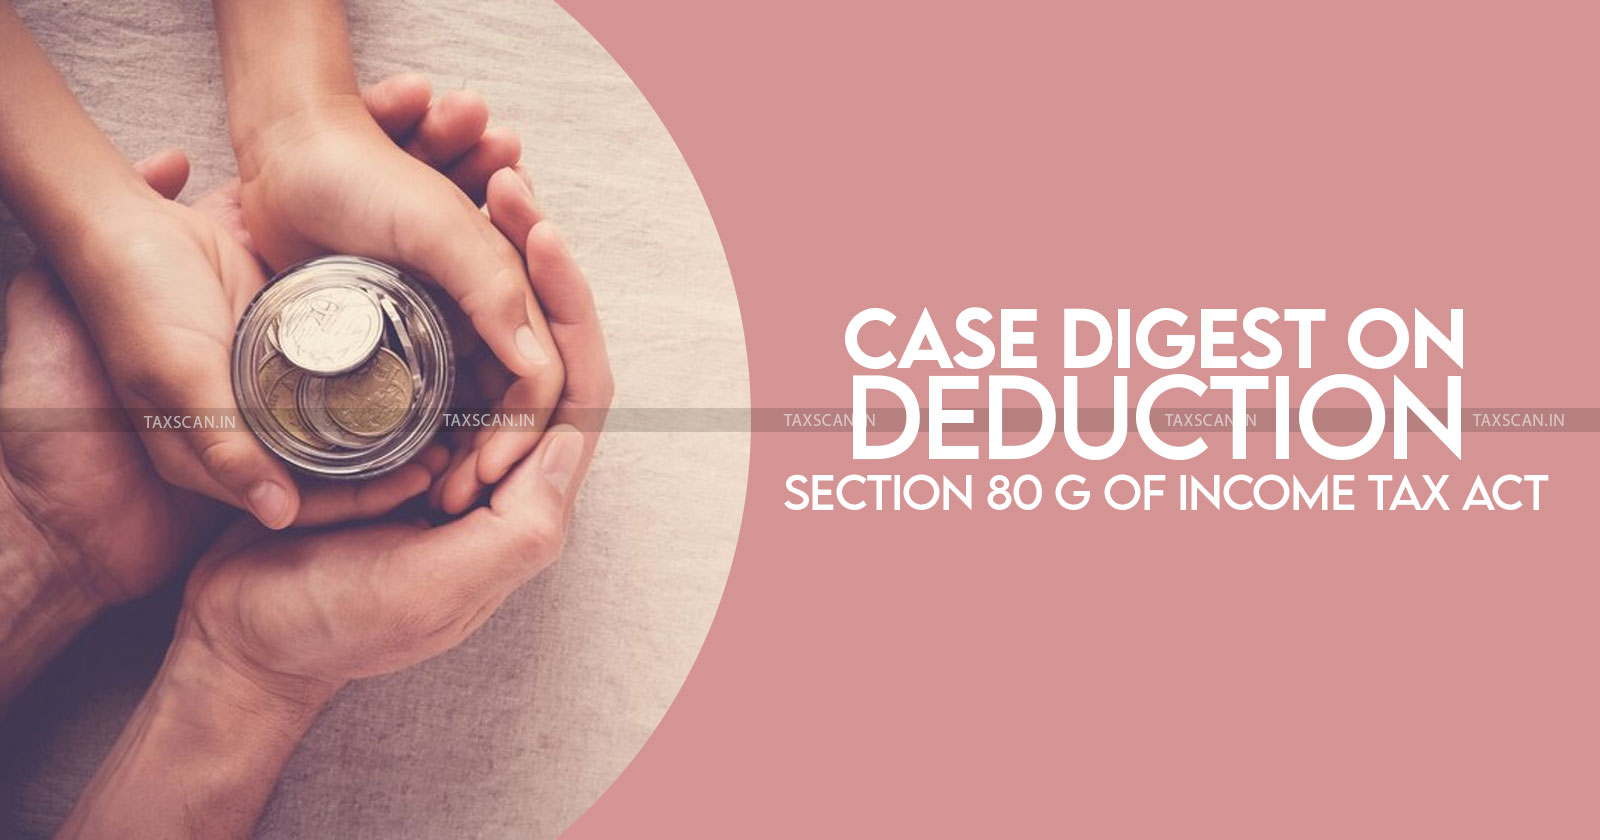 Section 80G deduction - Income Tax - Charitable donation deductions - donation deductions - taxscan